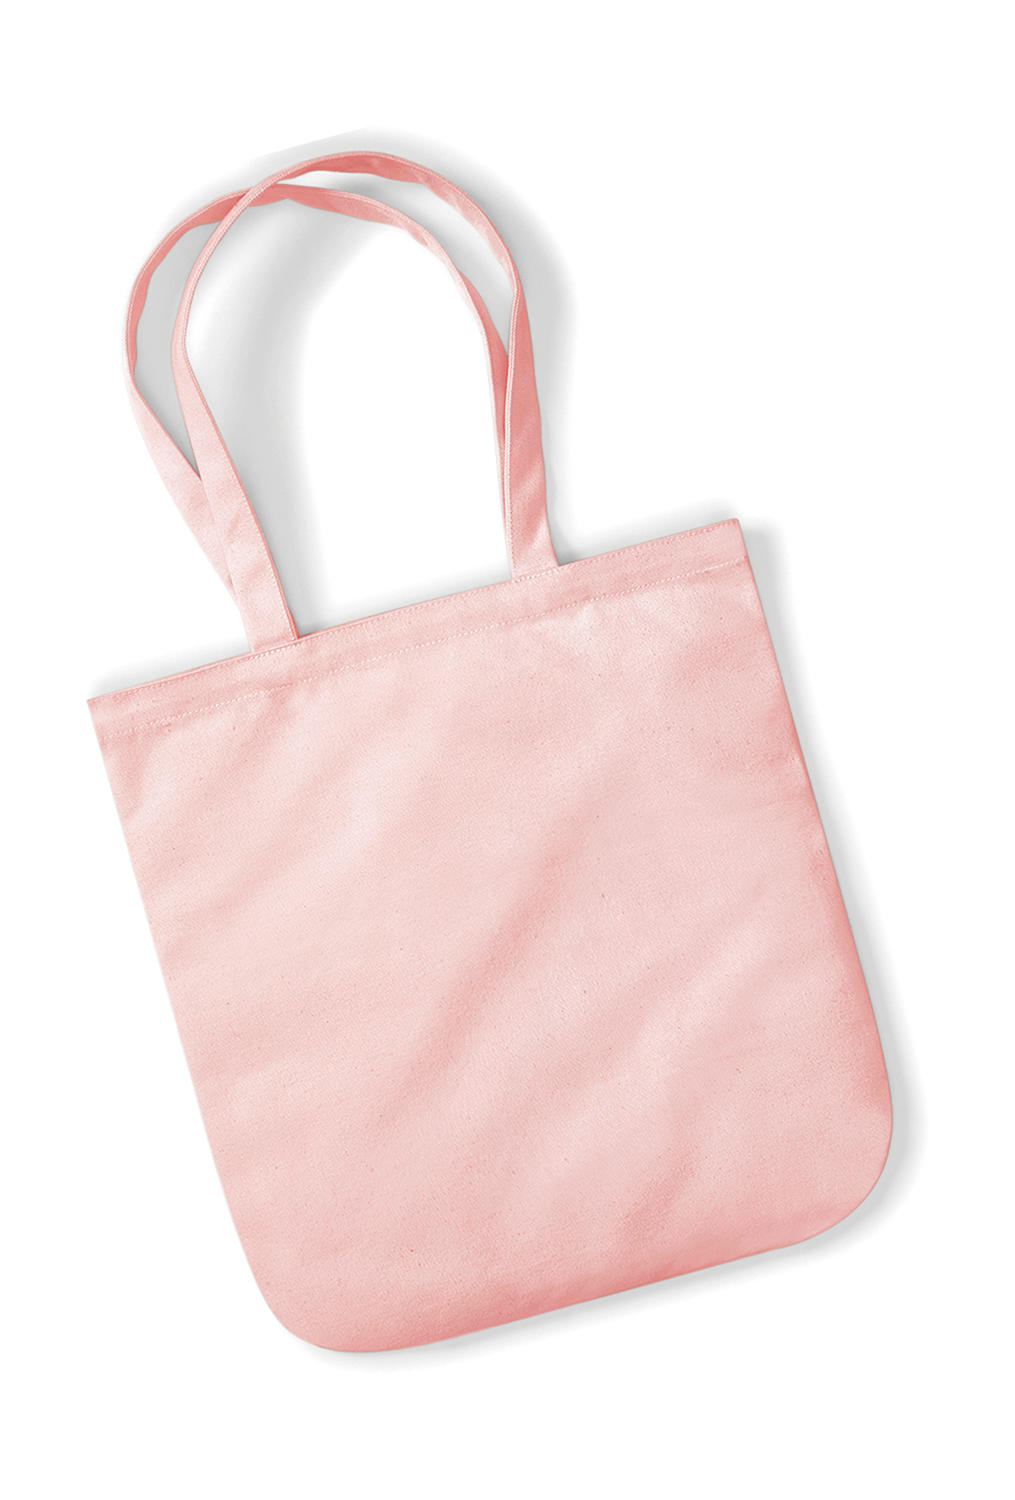  EarthAware? Organic Spring Tote in Farbe Pastel Pink